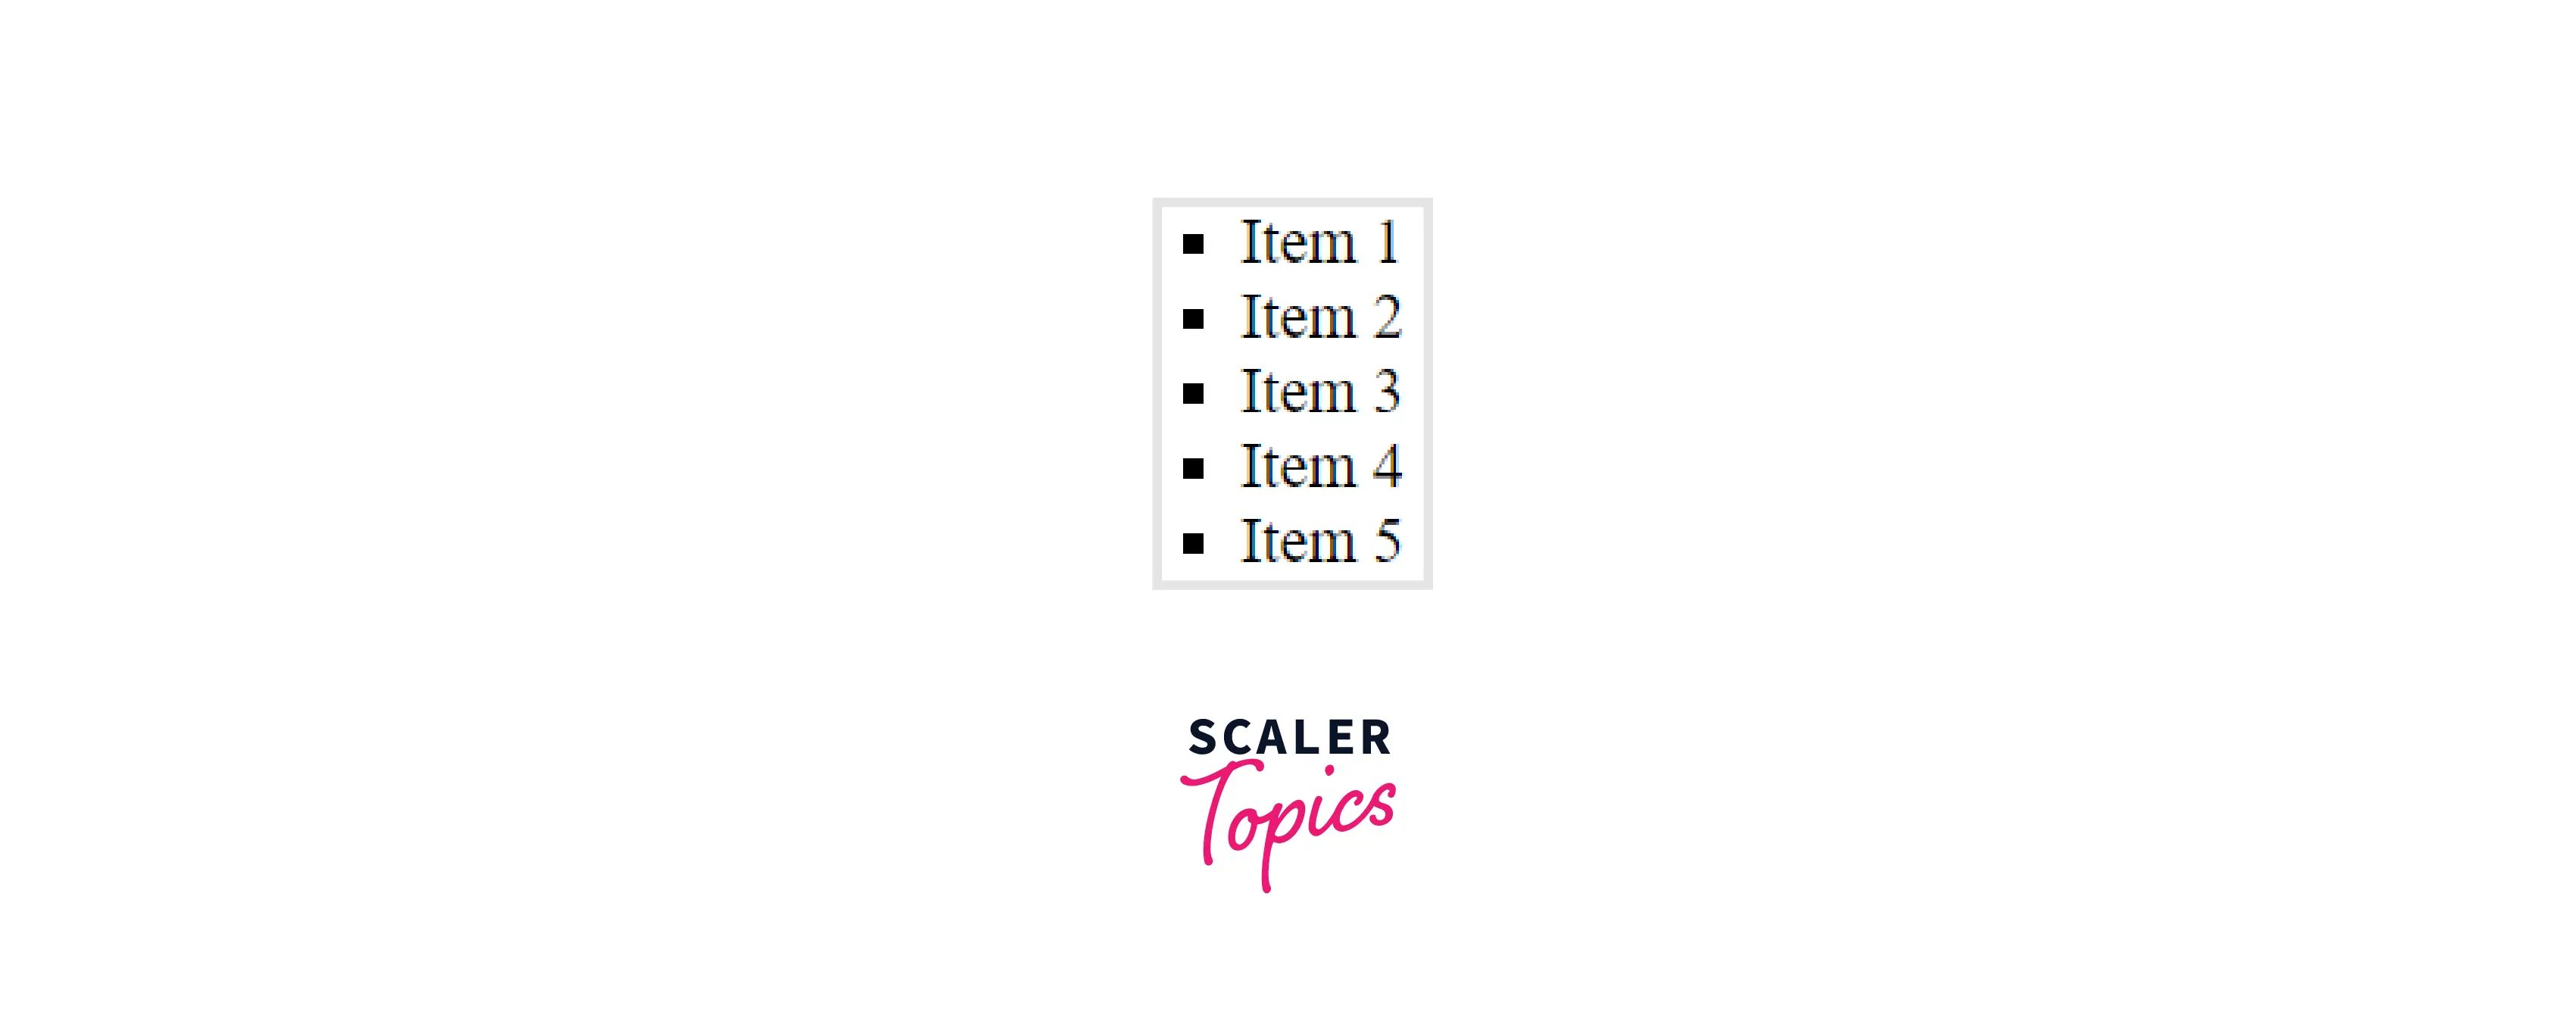 example-style-list-items-with-squares